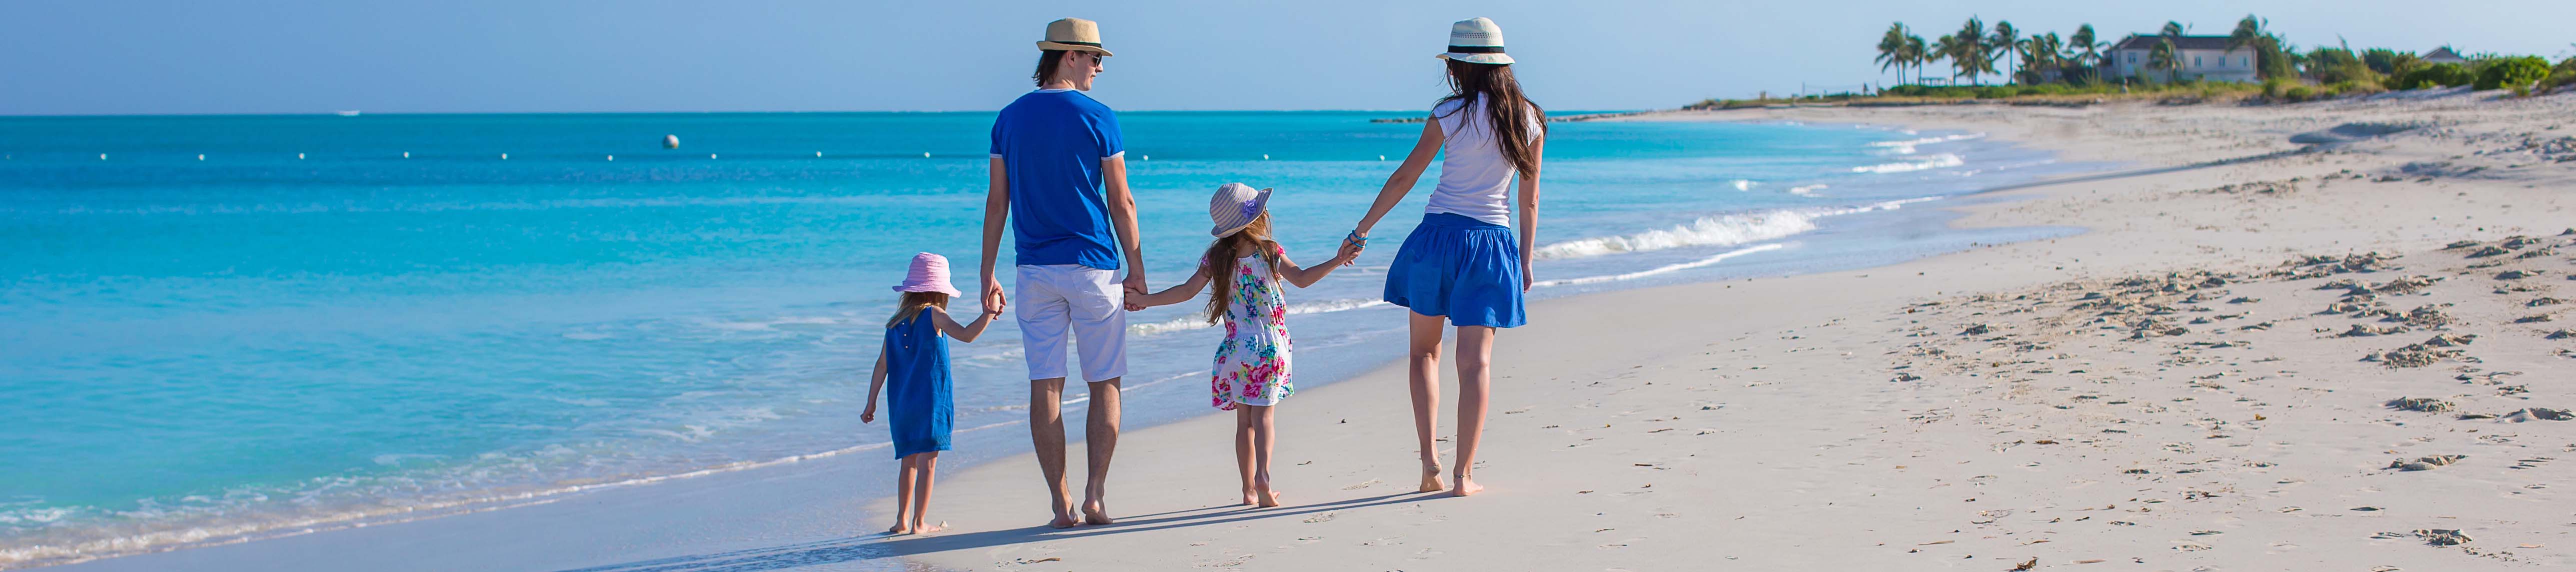 A family holding hands walking on the beach